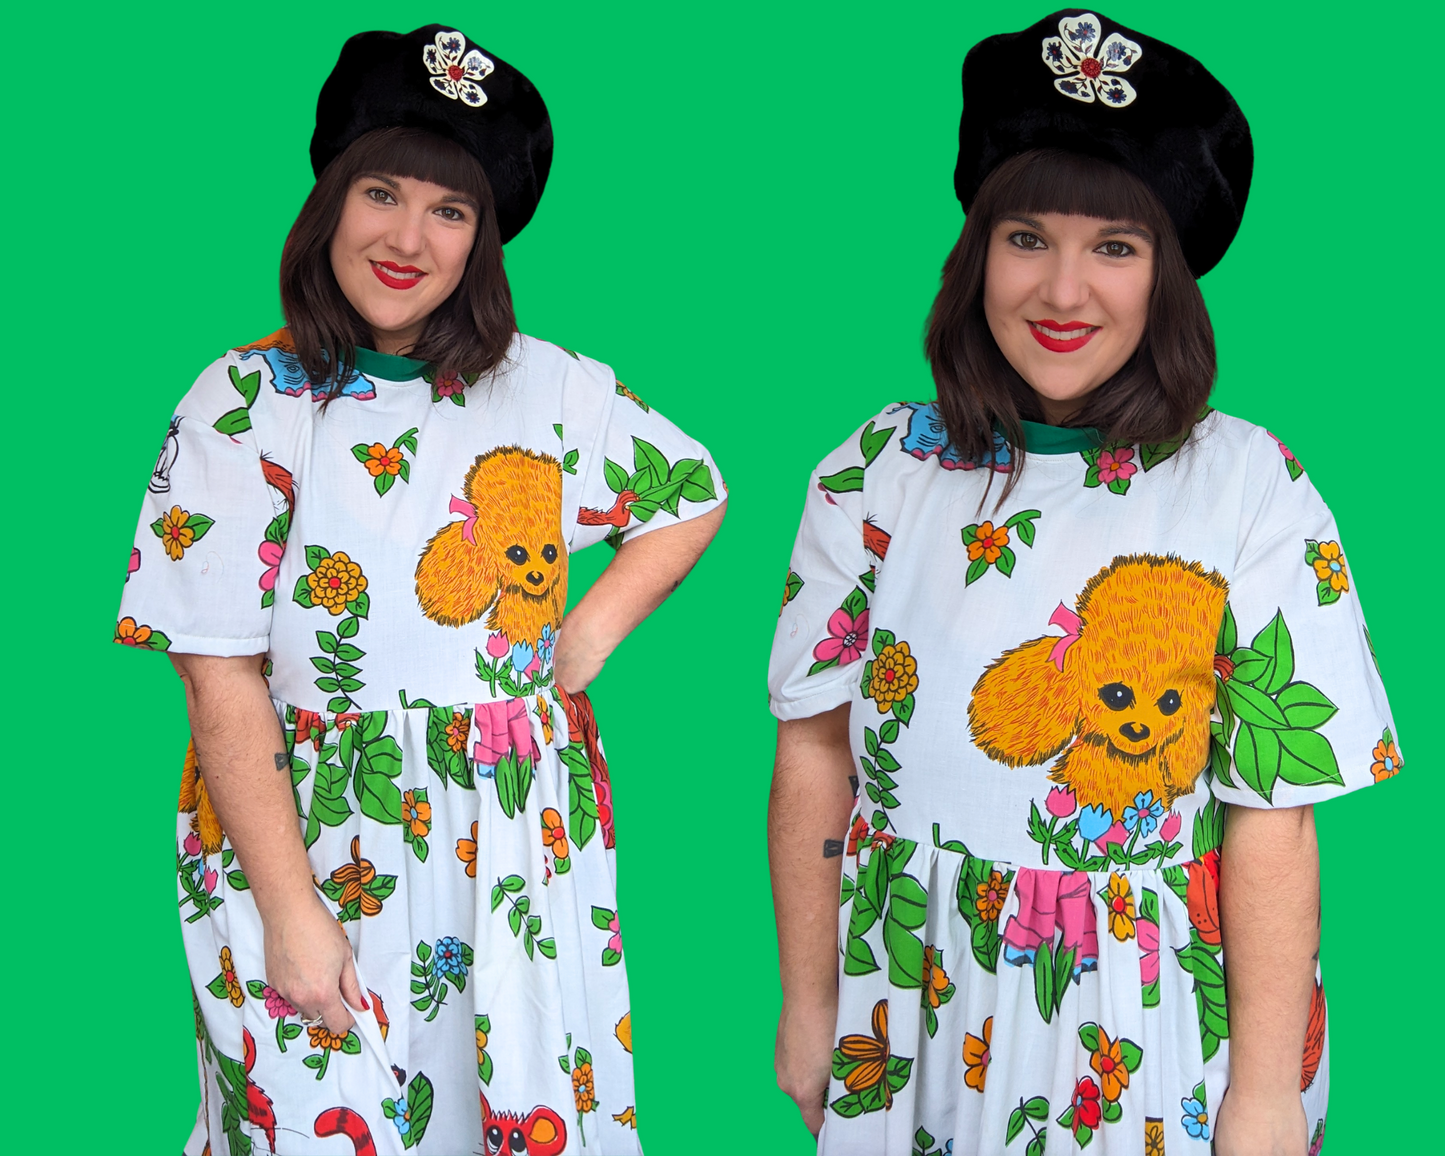 Handmade, Upcycled Vintage 1980's Groovy Animals Patterned Bedsheet T-Shirt Dress Fits Size S-M-L-XL